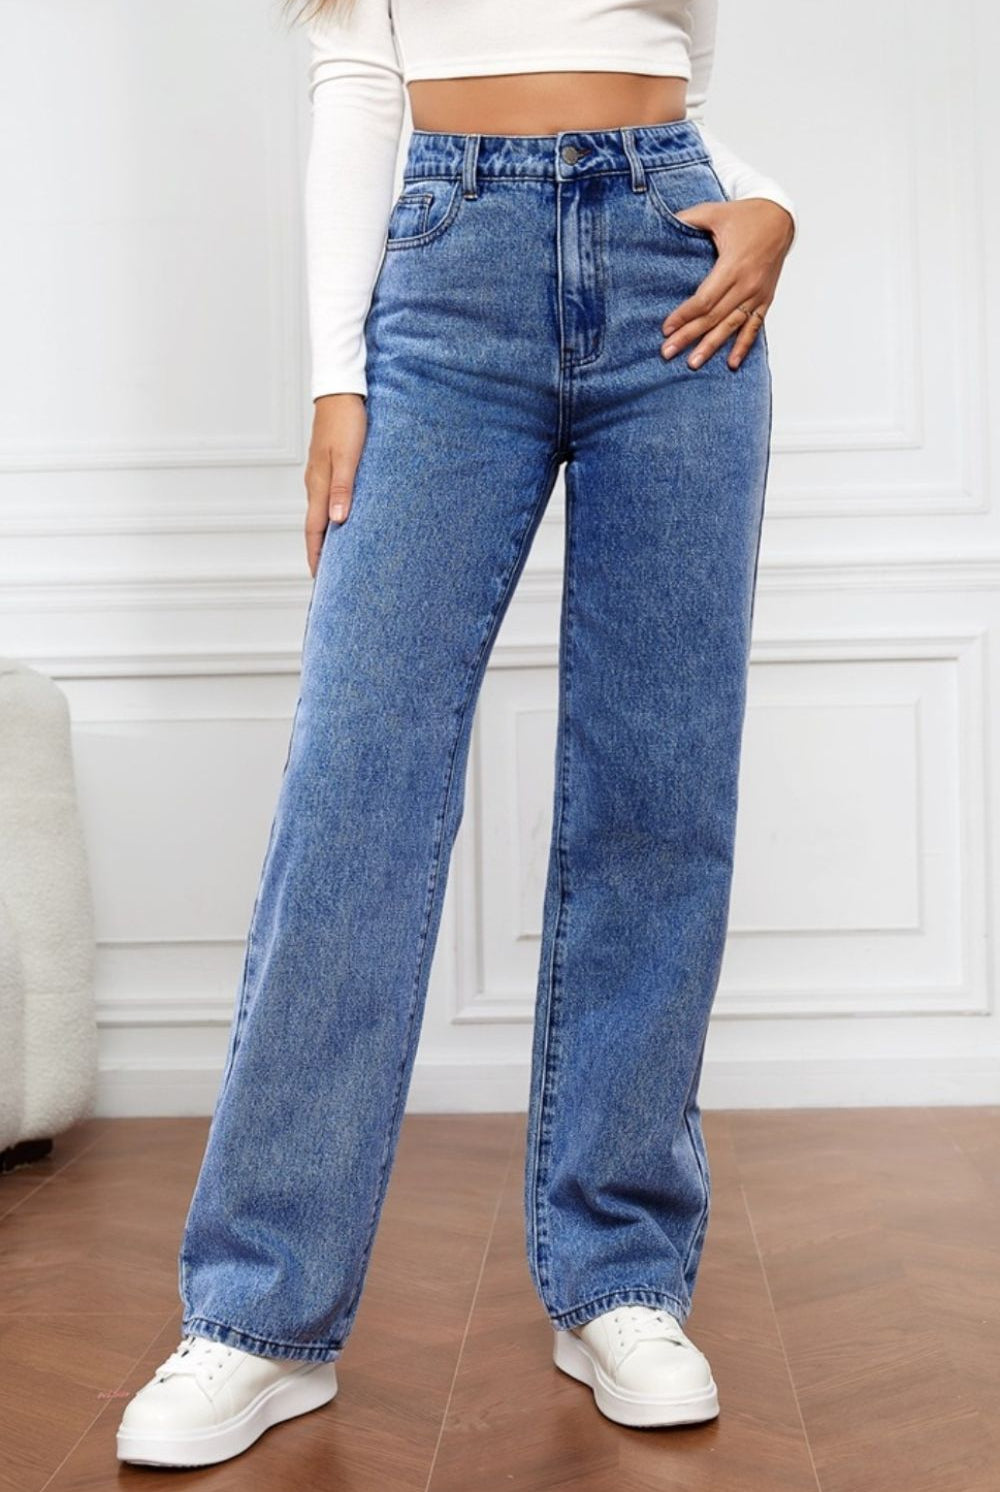 A woman sports the Classic High Waist Straight Jeans in a timeless blue wash, paired with a white crop top and sneakers, embodying a chic yet casual aesthetic.